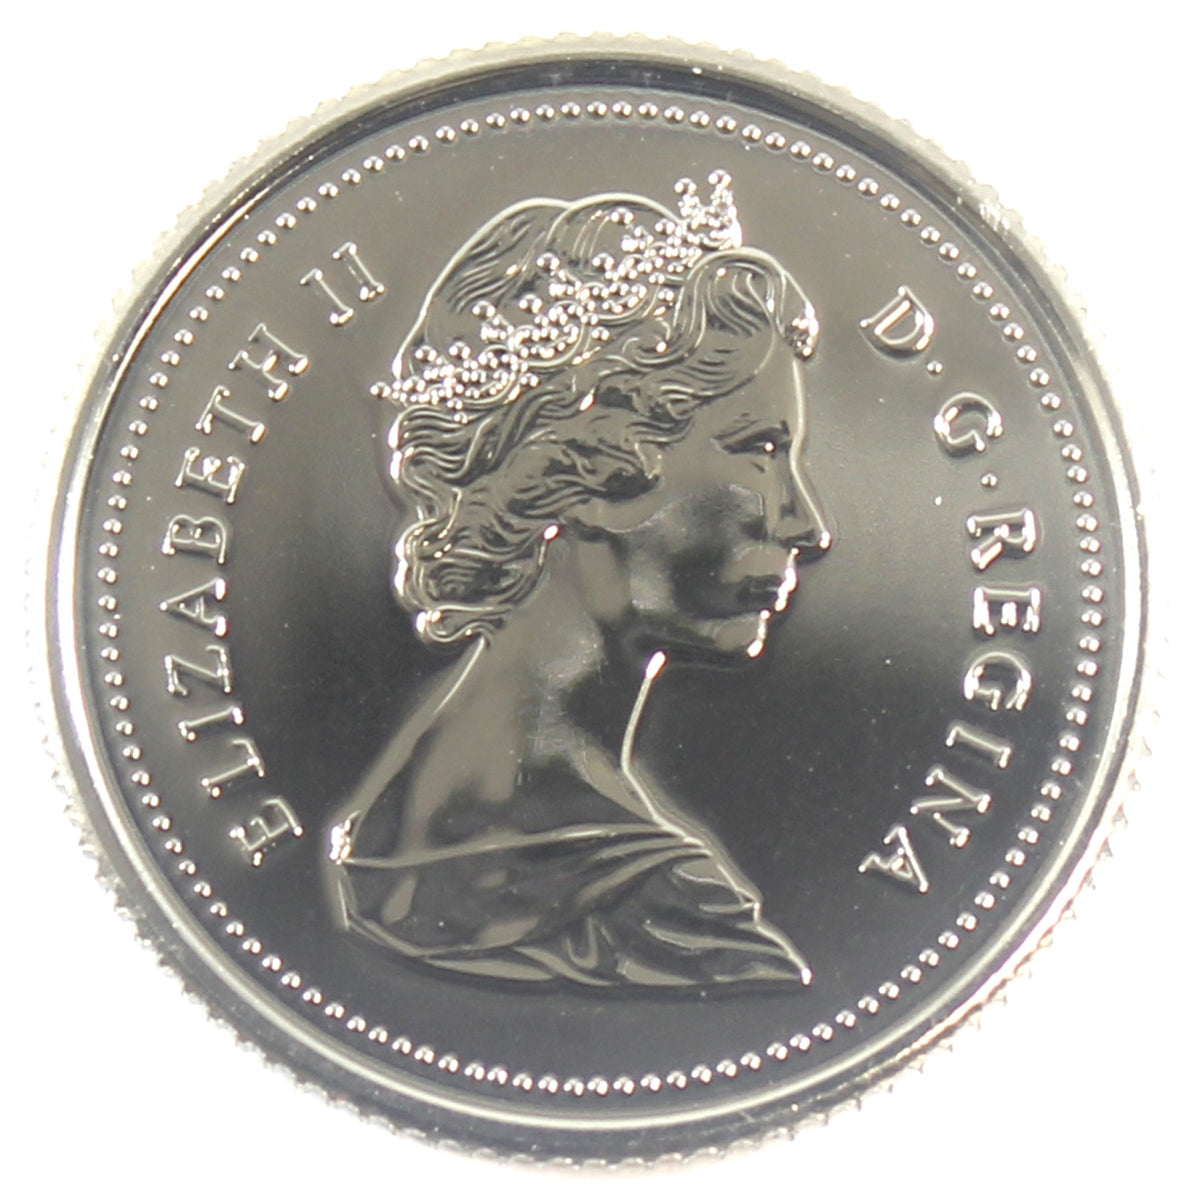 1986 Canada 10-cent Proof Like